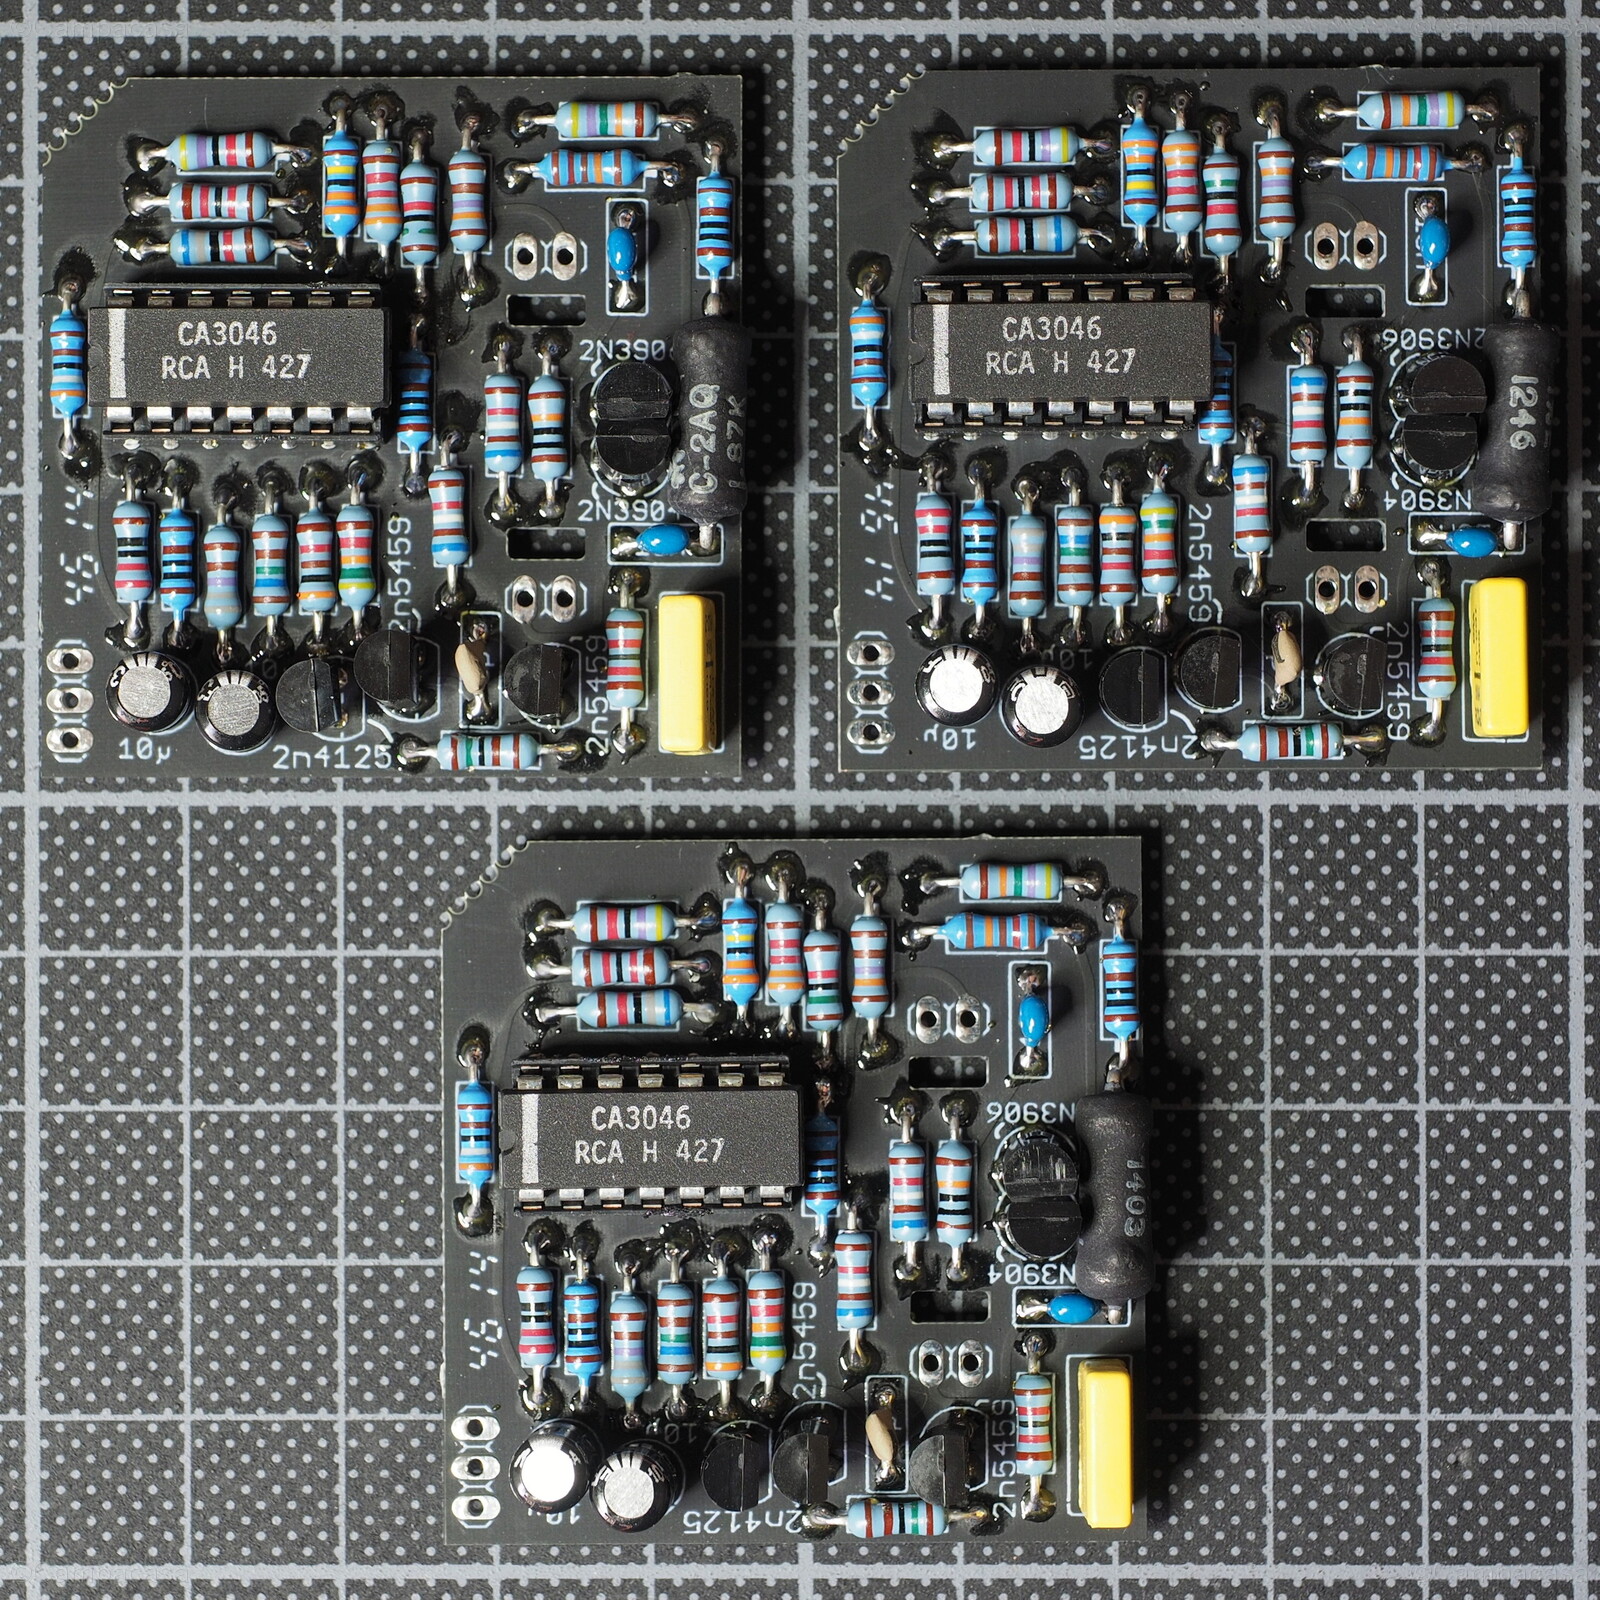 VCO Boards Separated